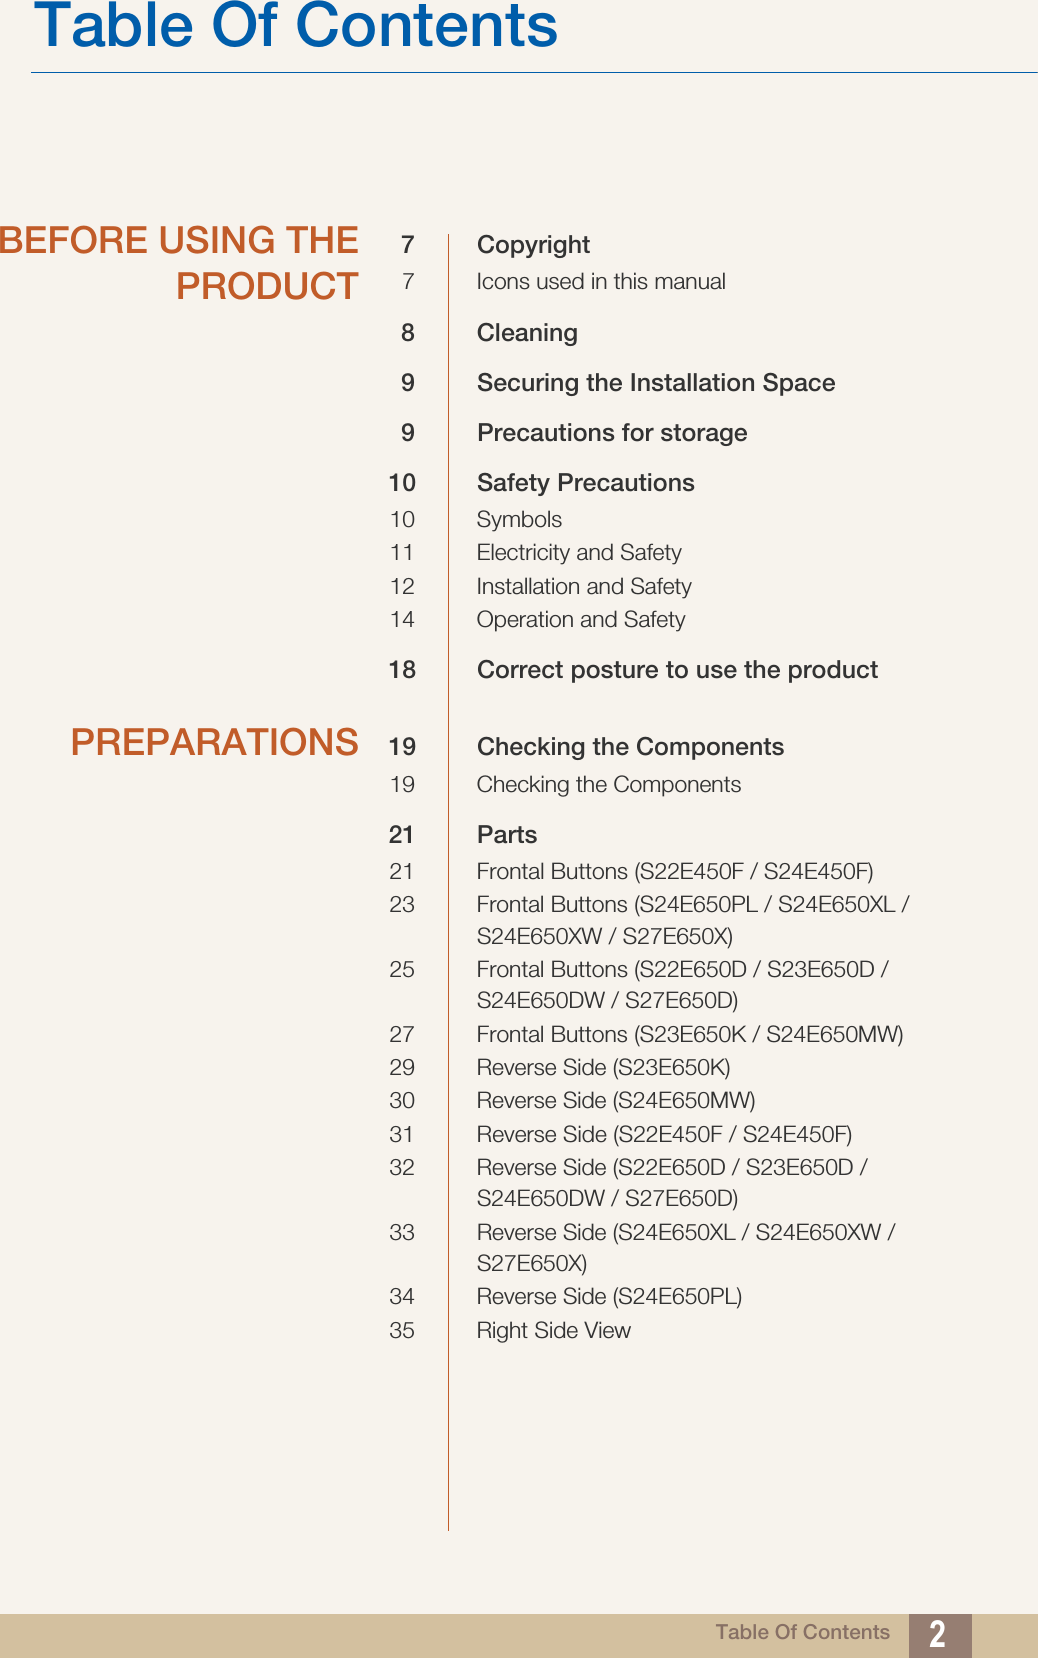 Table Of Contents 2Table Of ContentsBEFORE USING THEPRODUCT7 Copyright7 Icons used in this manual8 Cleaning9 Securing the Installation Space9 Precautions for storage10 Safety Precautions10 Symbols11 Electricity and Safety12 Installation and Safety 14 Operation and Safety18 Correct posture to use the product PREPARATIONS 19 Checking the Components19 Checking the Components21 Parts21 Frontal Buttons (S22E450F / S24E450F)23 Frontal Buttons (S24E650PL / S24E650XL / S24E650XW / S27E650X)25 Frontal Buttons (S22E650D / S23E650D / S24E650DW / S27E650D)27 Frontal Buttons (S23E650K / S24E650MW)29 Reverse Side (S23E650K)30 Reverse Side (S24E650MW)31 Reverse Side (S22E450F / S24E450F)32 Reverse Side (S22E650D / S23E650D / S24E650DW / S27E650D)33 Reverse Side (S24E650XL / S24E650XW / S27E650X)34 Reverse Side (S24E650PL)35 Right Side View